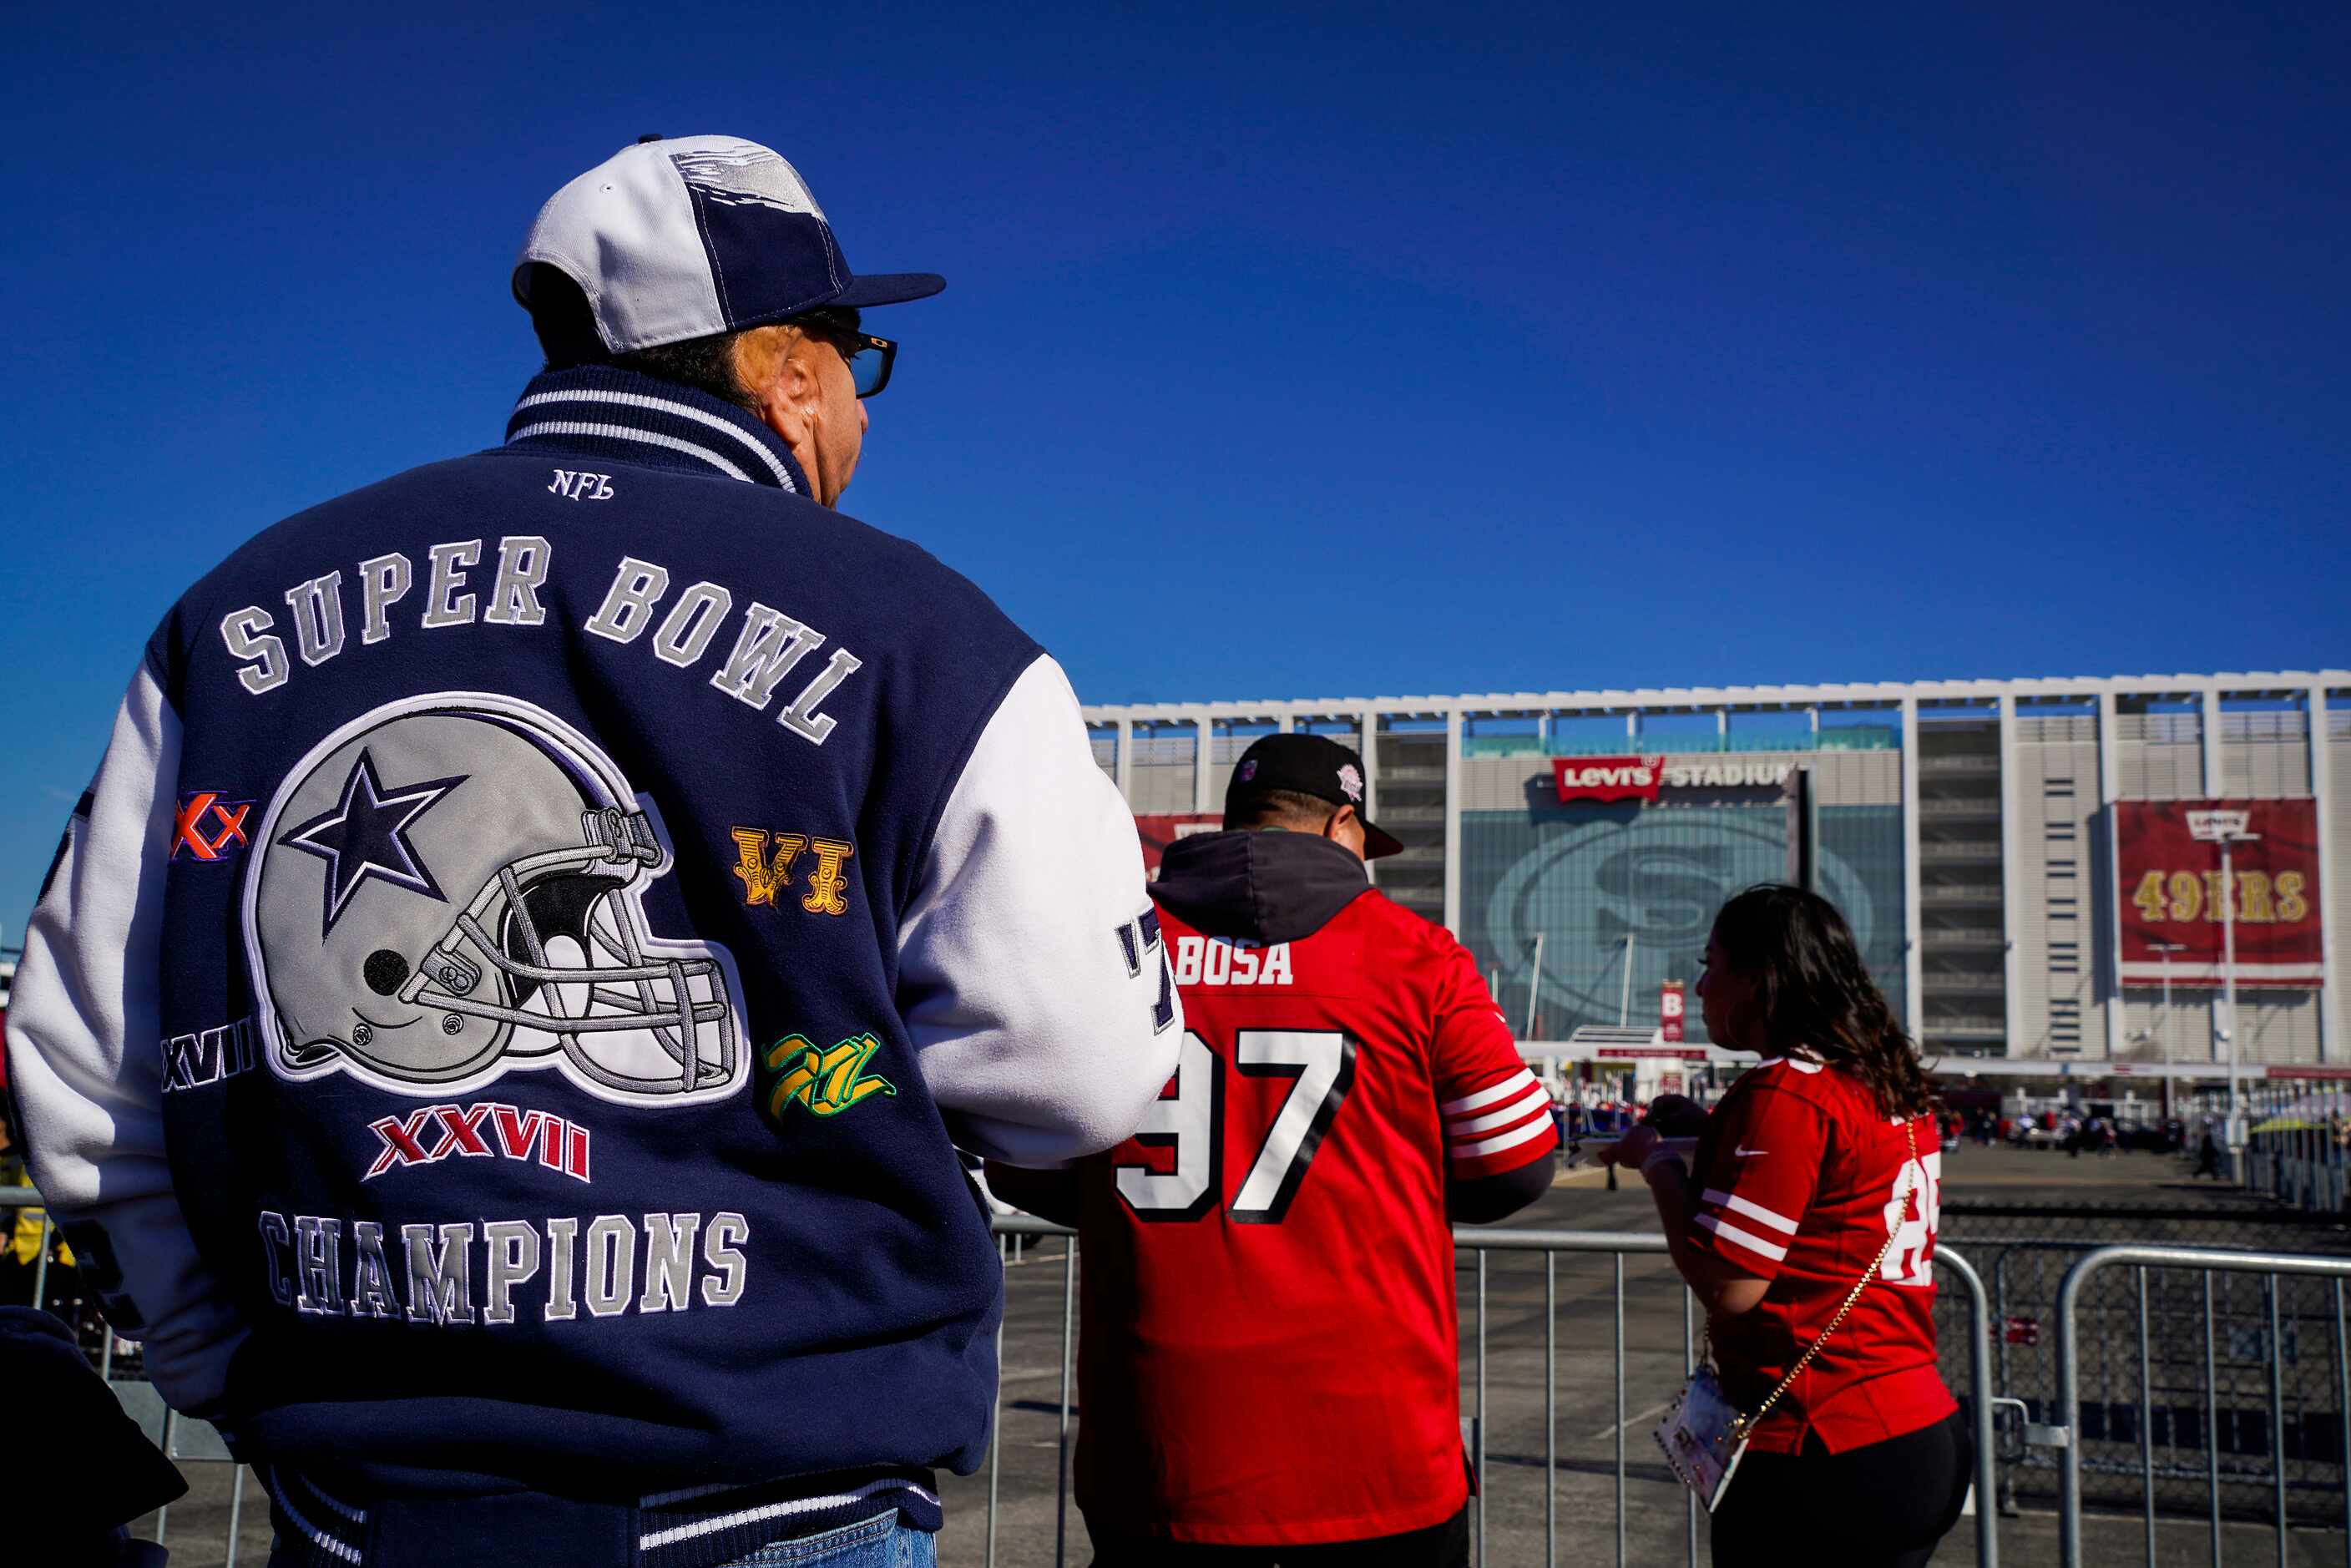 Fans of the Dallas Cowboys and the San Francisco 49ers tailgate before an NFL divisional...